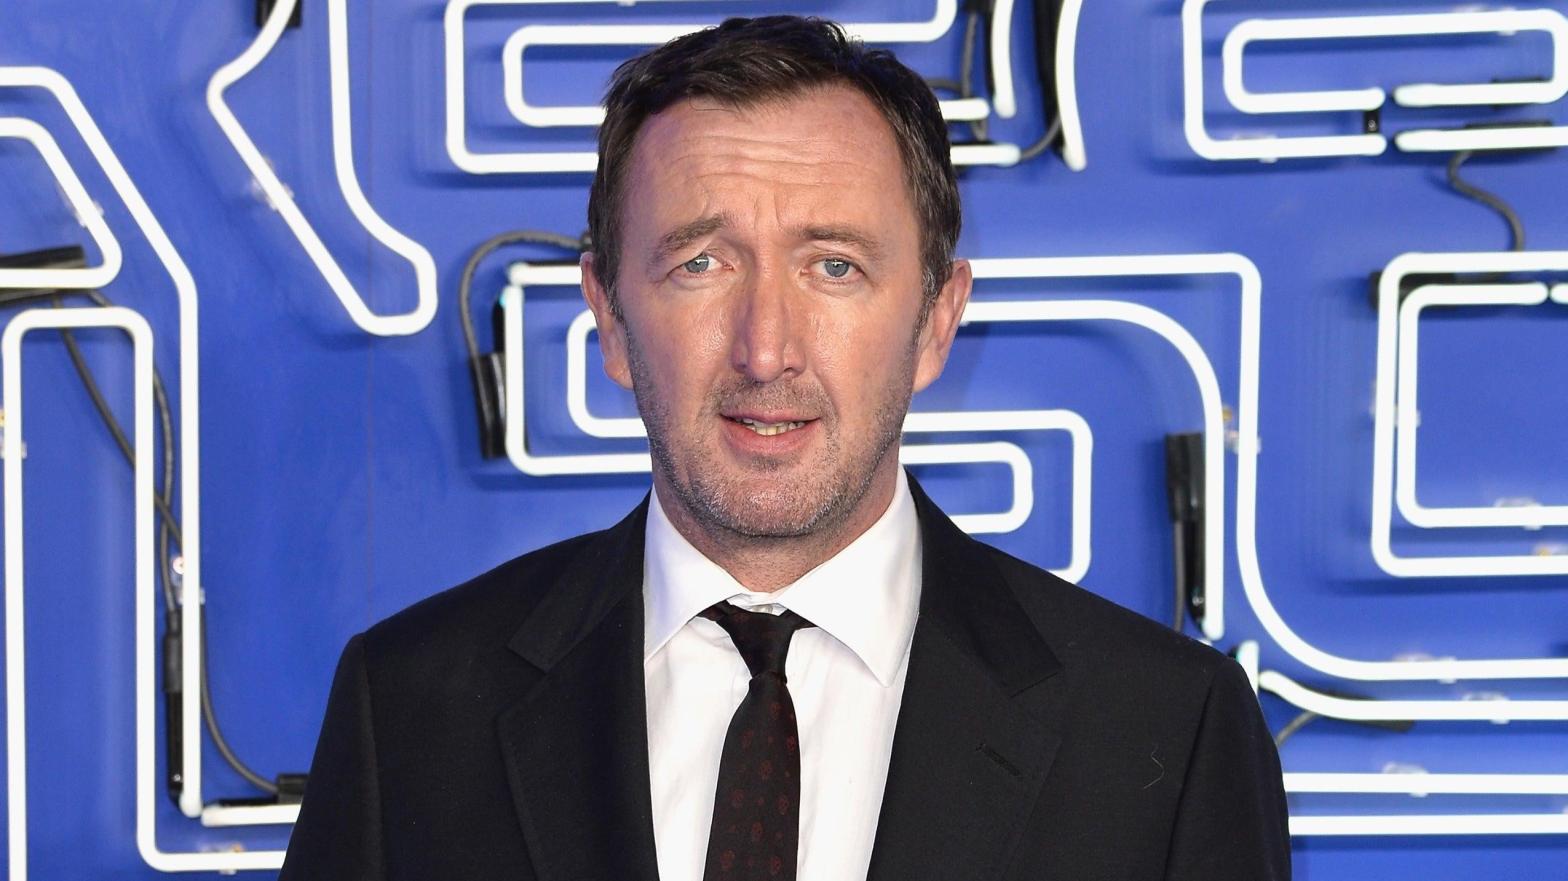 Ralph Ineson, seen here at the Ready Player One premiere in 2018, has had a Ready Player One type career.  (Photo: Jeff Spicer, Getty Images)